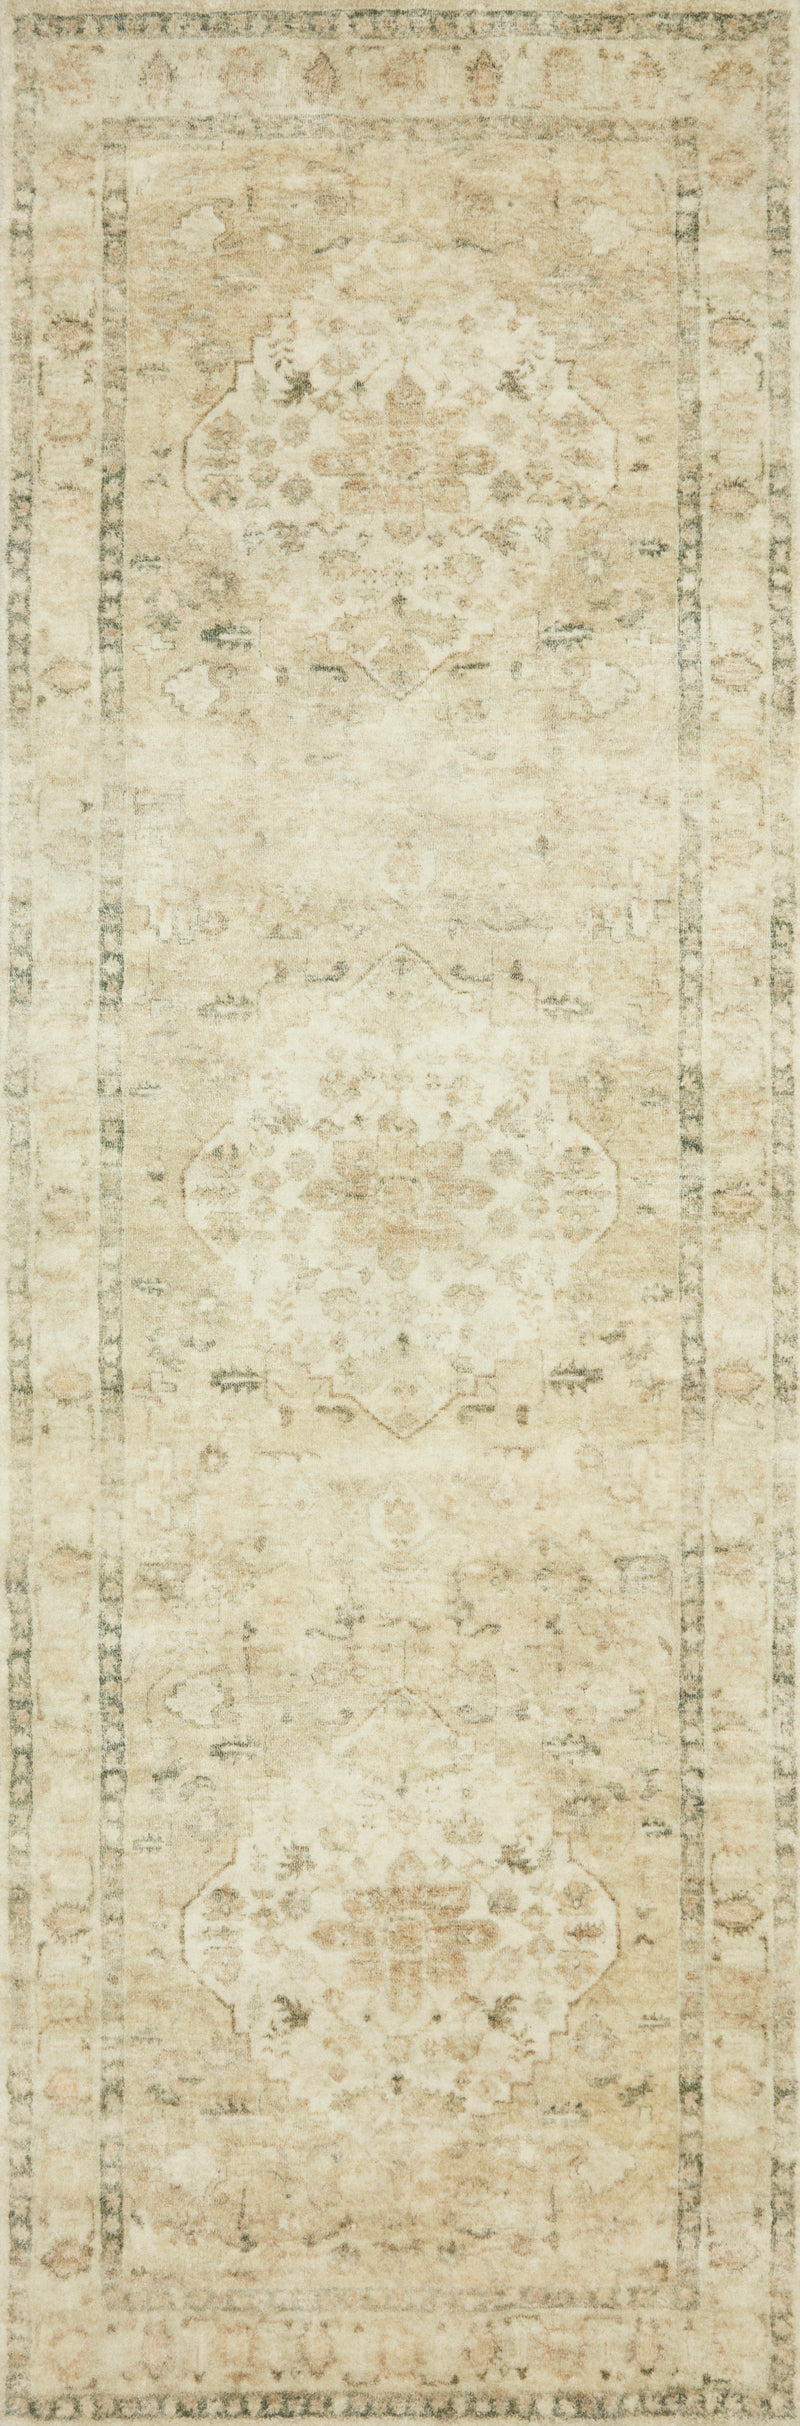 media image for Rosette Rug in Sand / Ivory by Loloi II 256